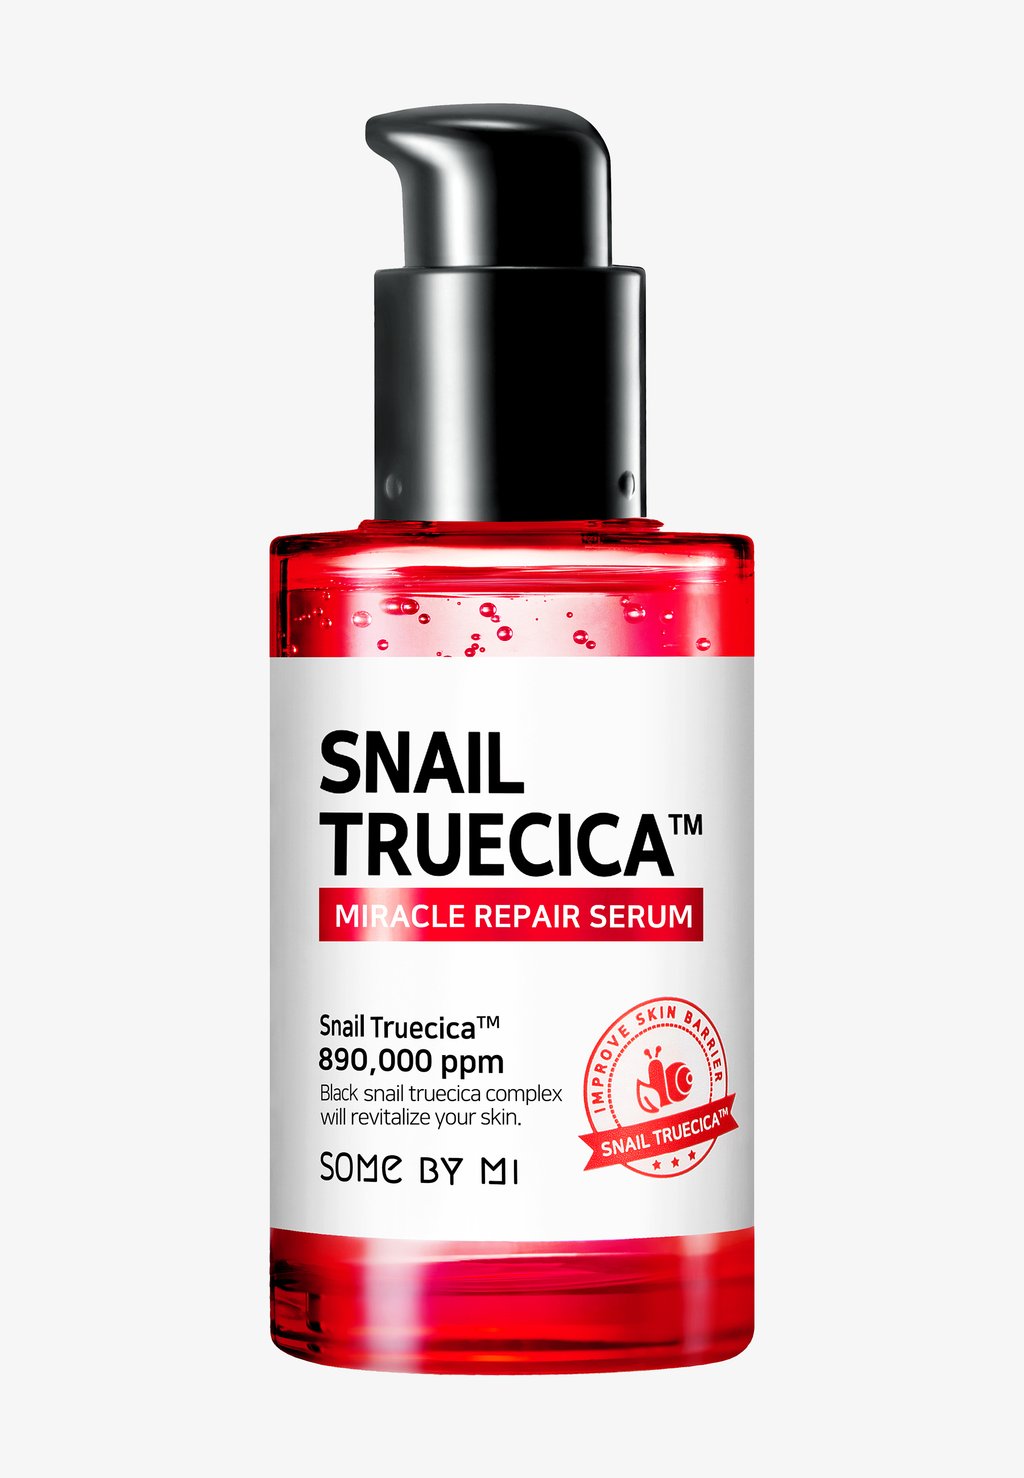 some by mi snail trucica miracle repair toner 135 ml Сыворотка Snail Truecica Miracle Repair Serum SOME BY MI